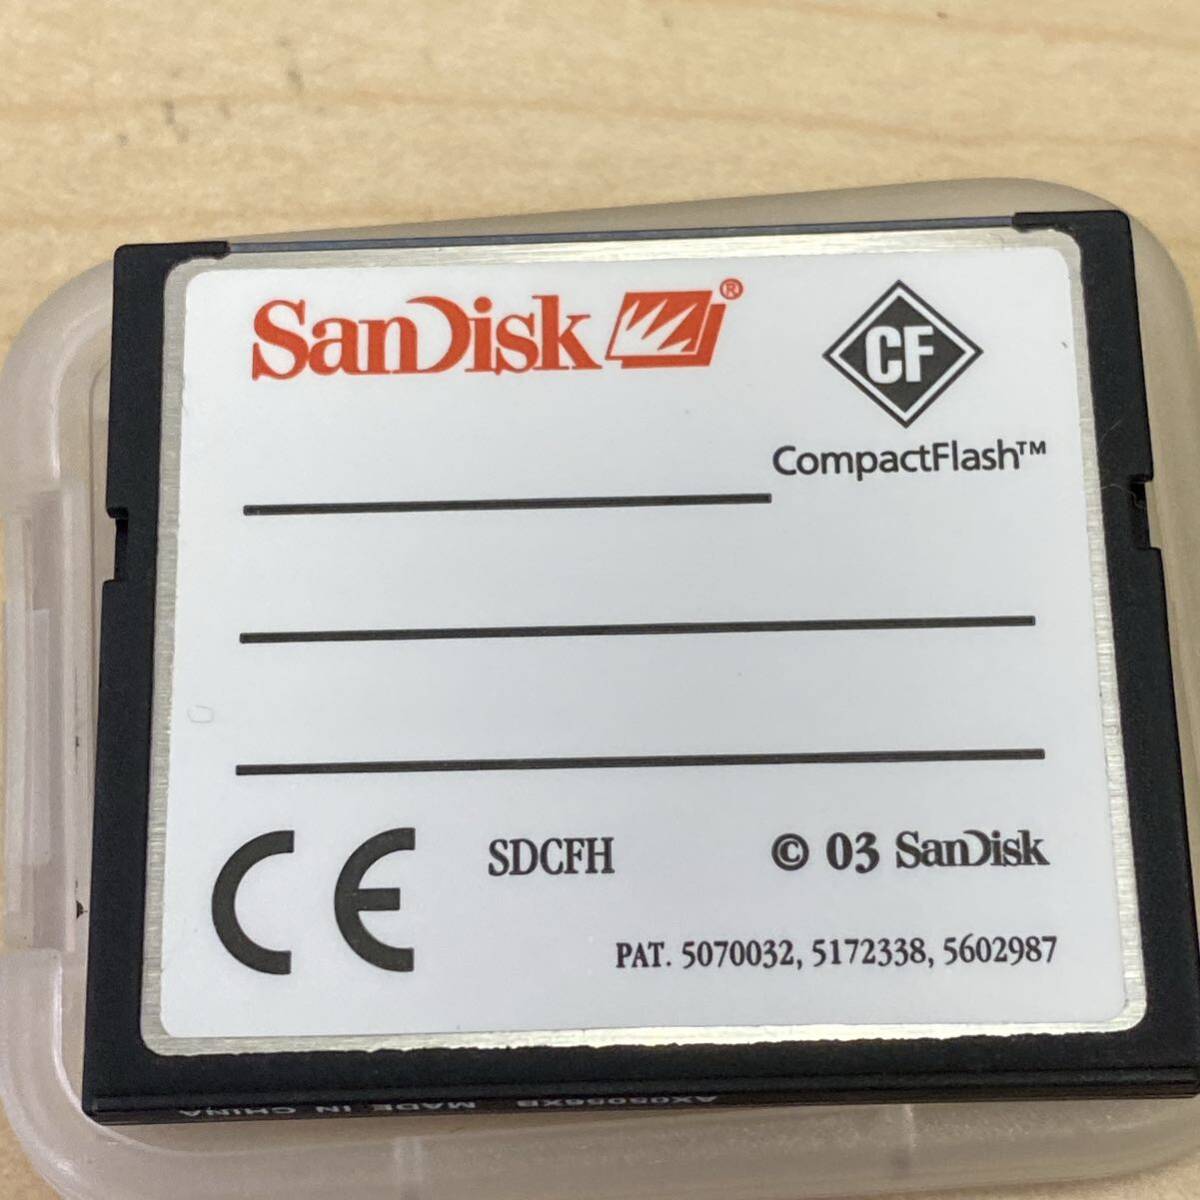 [TS0427] SanDisk SanDisk CompactFlash ultra Ⅱ 512MB Extreme Ⅲ 2.0GB CF card-case attaching 